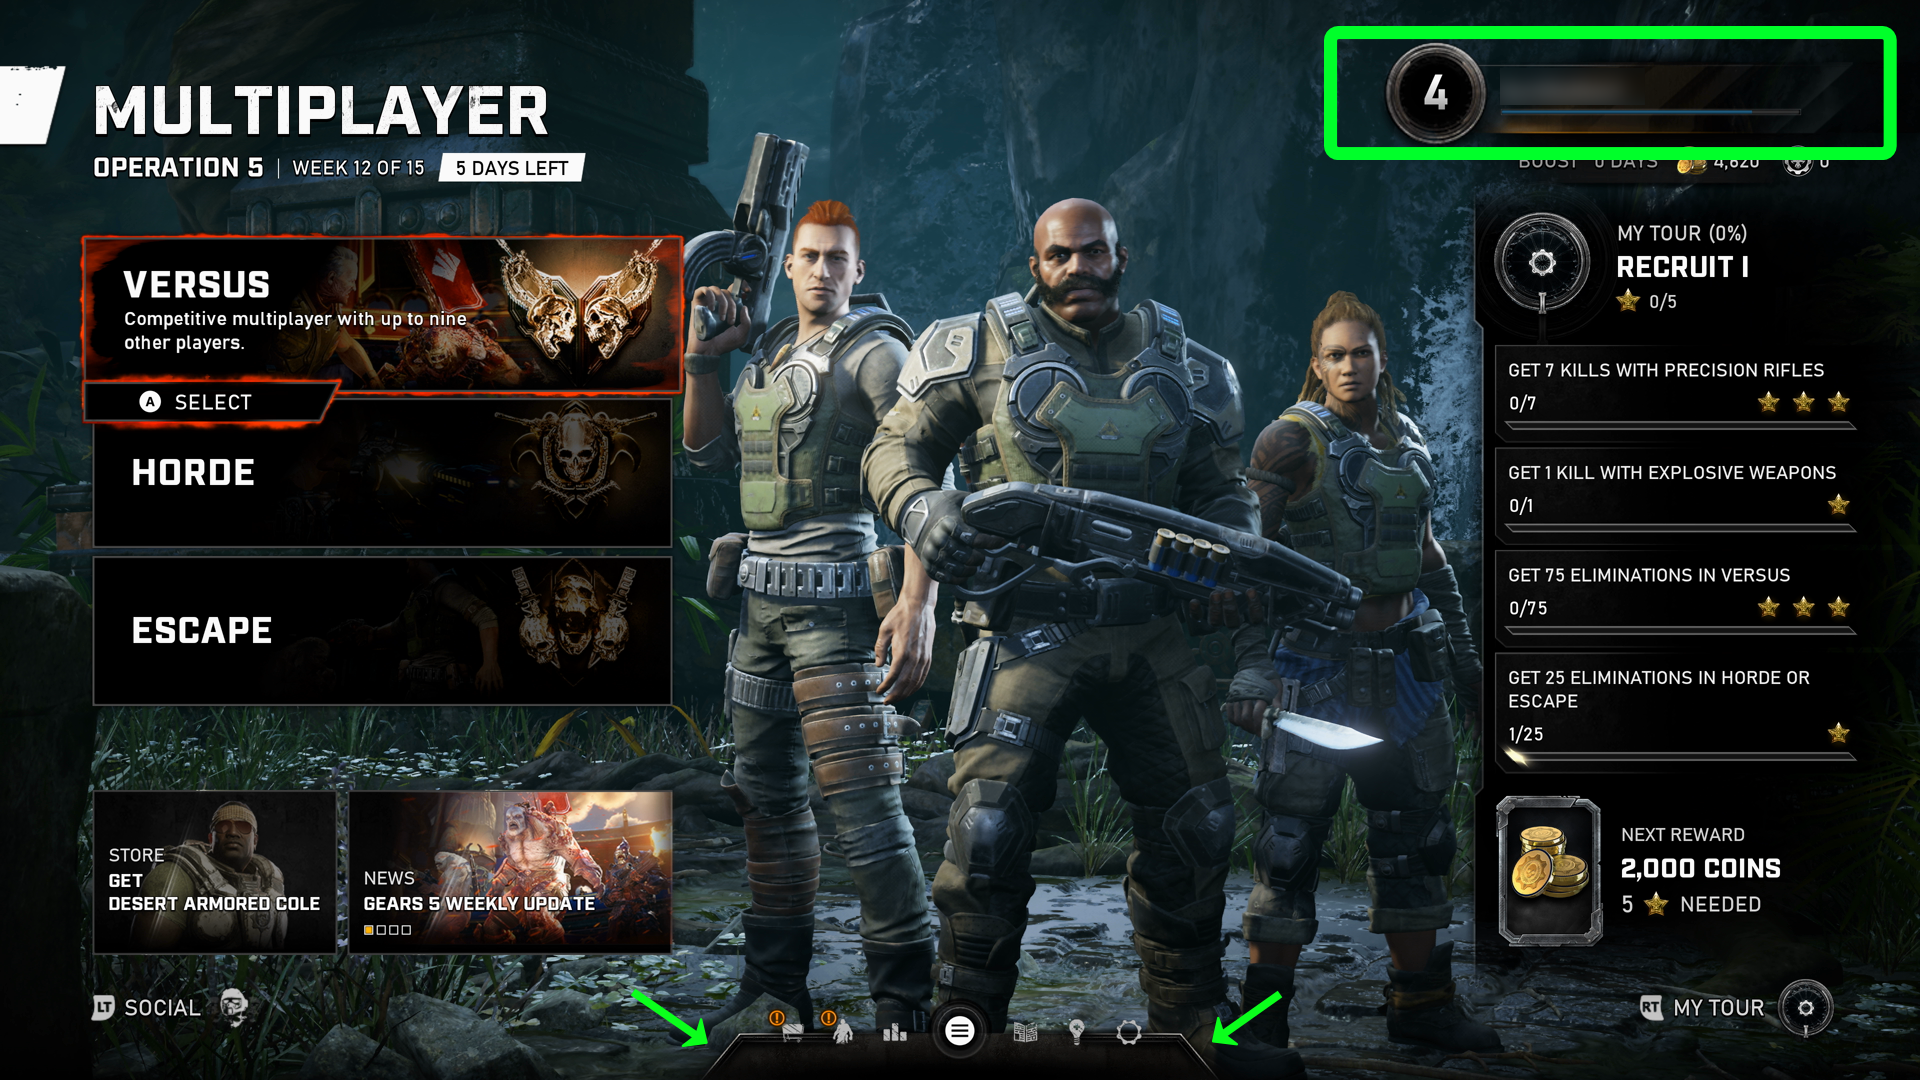 Gears 5 Versus menu. At the top of this screen is a blue and gray decorative rectangle around the player's gamertag. There's a green rectangle around this decorative image to indicate that this is the decorative image that the example is referencing. There are also two green arrows pointing to both sides of an angular decorative graphic that's surrounding other menu options.